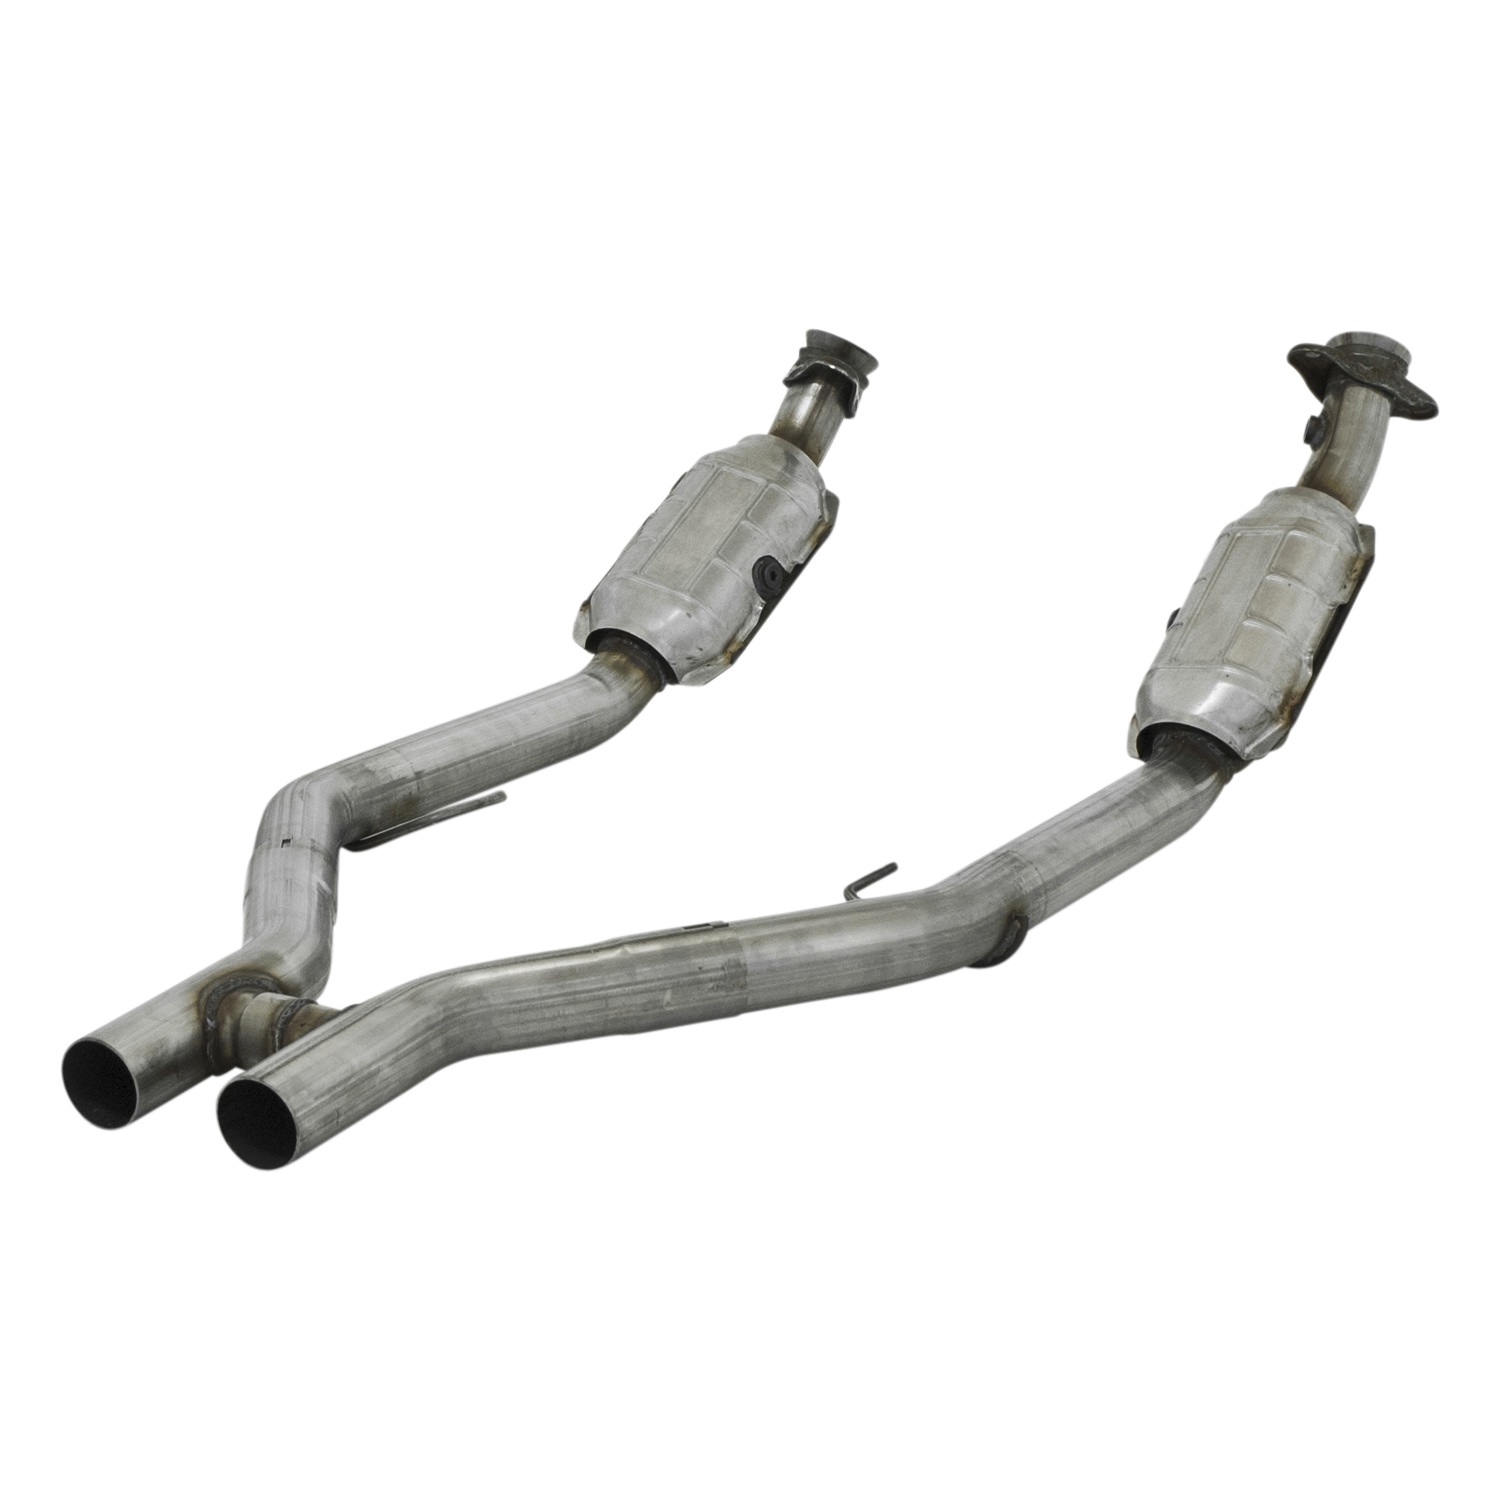 Flowmaster Flowmaster 2020028 Direct Fit Catalytic Converter Fits 05-09 Mustang